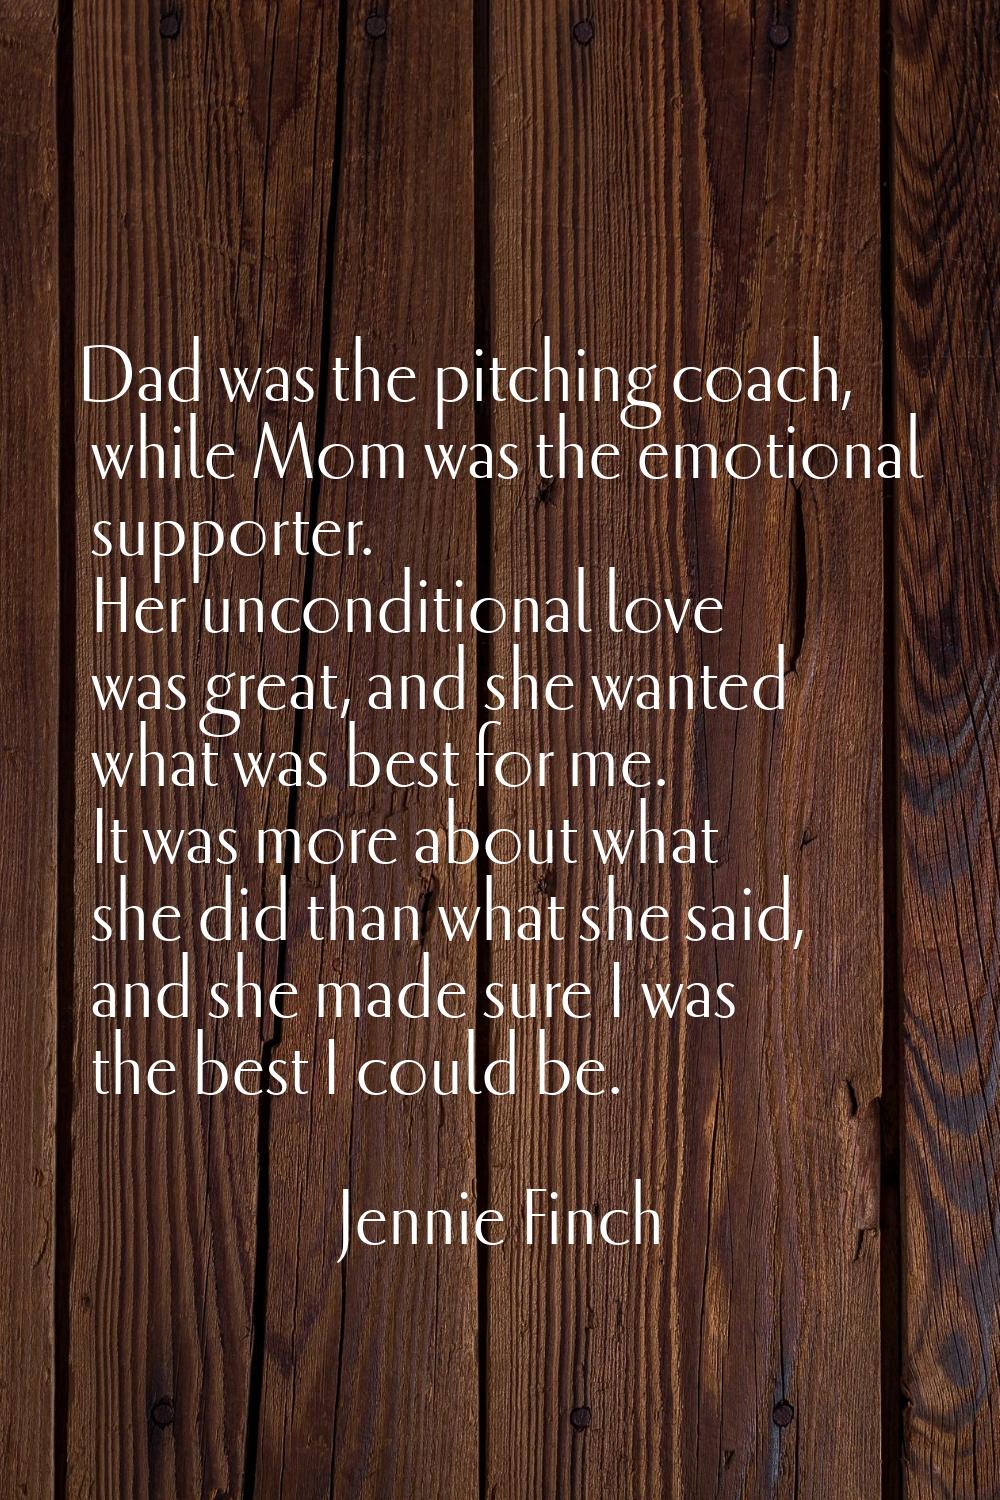 Dad was the pitching coach, while Mom was the emotional supporter. Her unconditional love was great